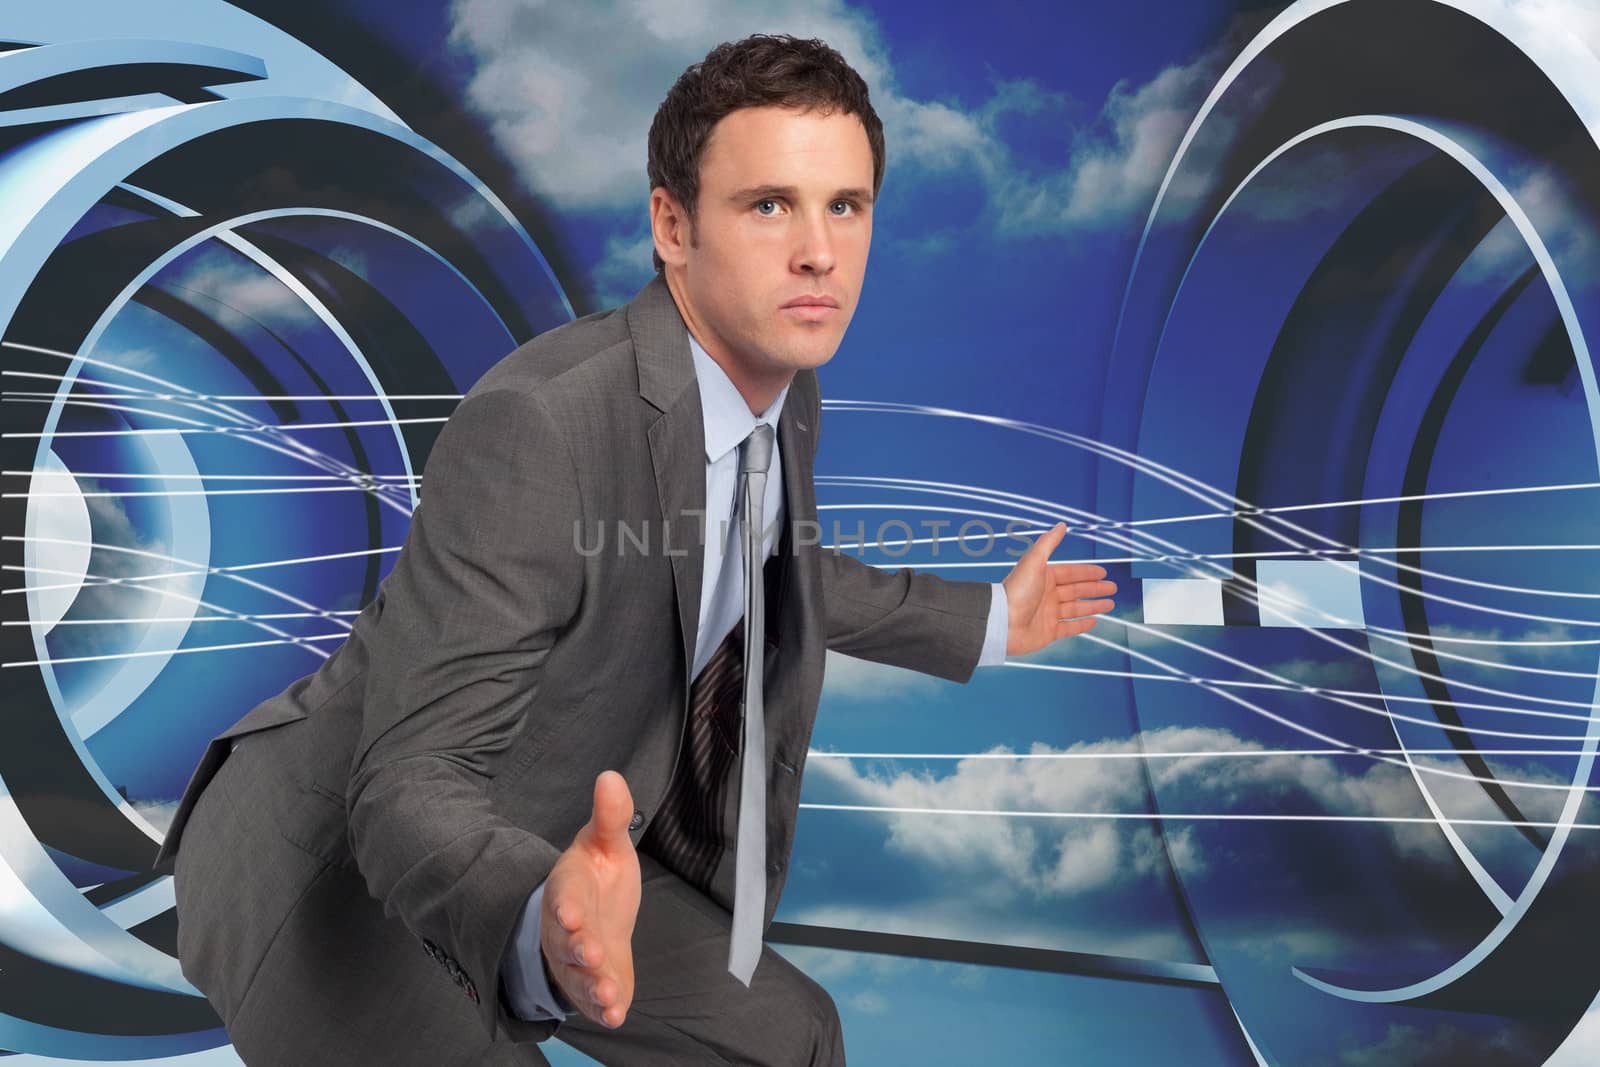 Businessman posing with hands out against abstract white line design on blue sky